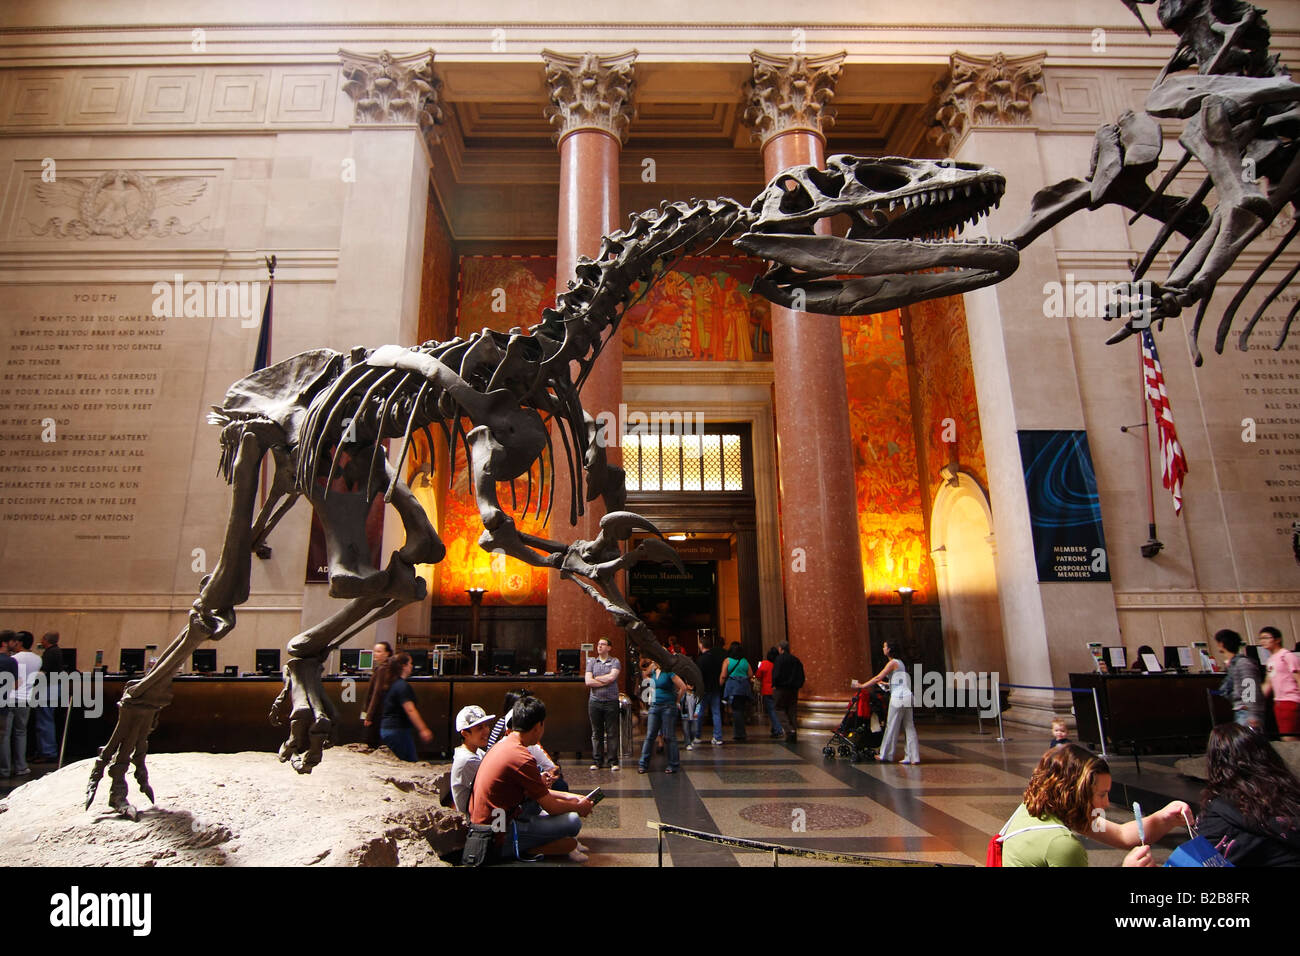 American Museum of Natural History - New York City, USA Stock Photo